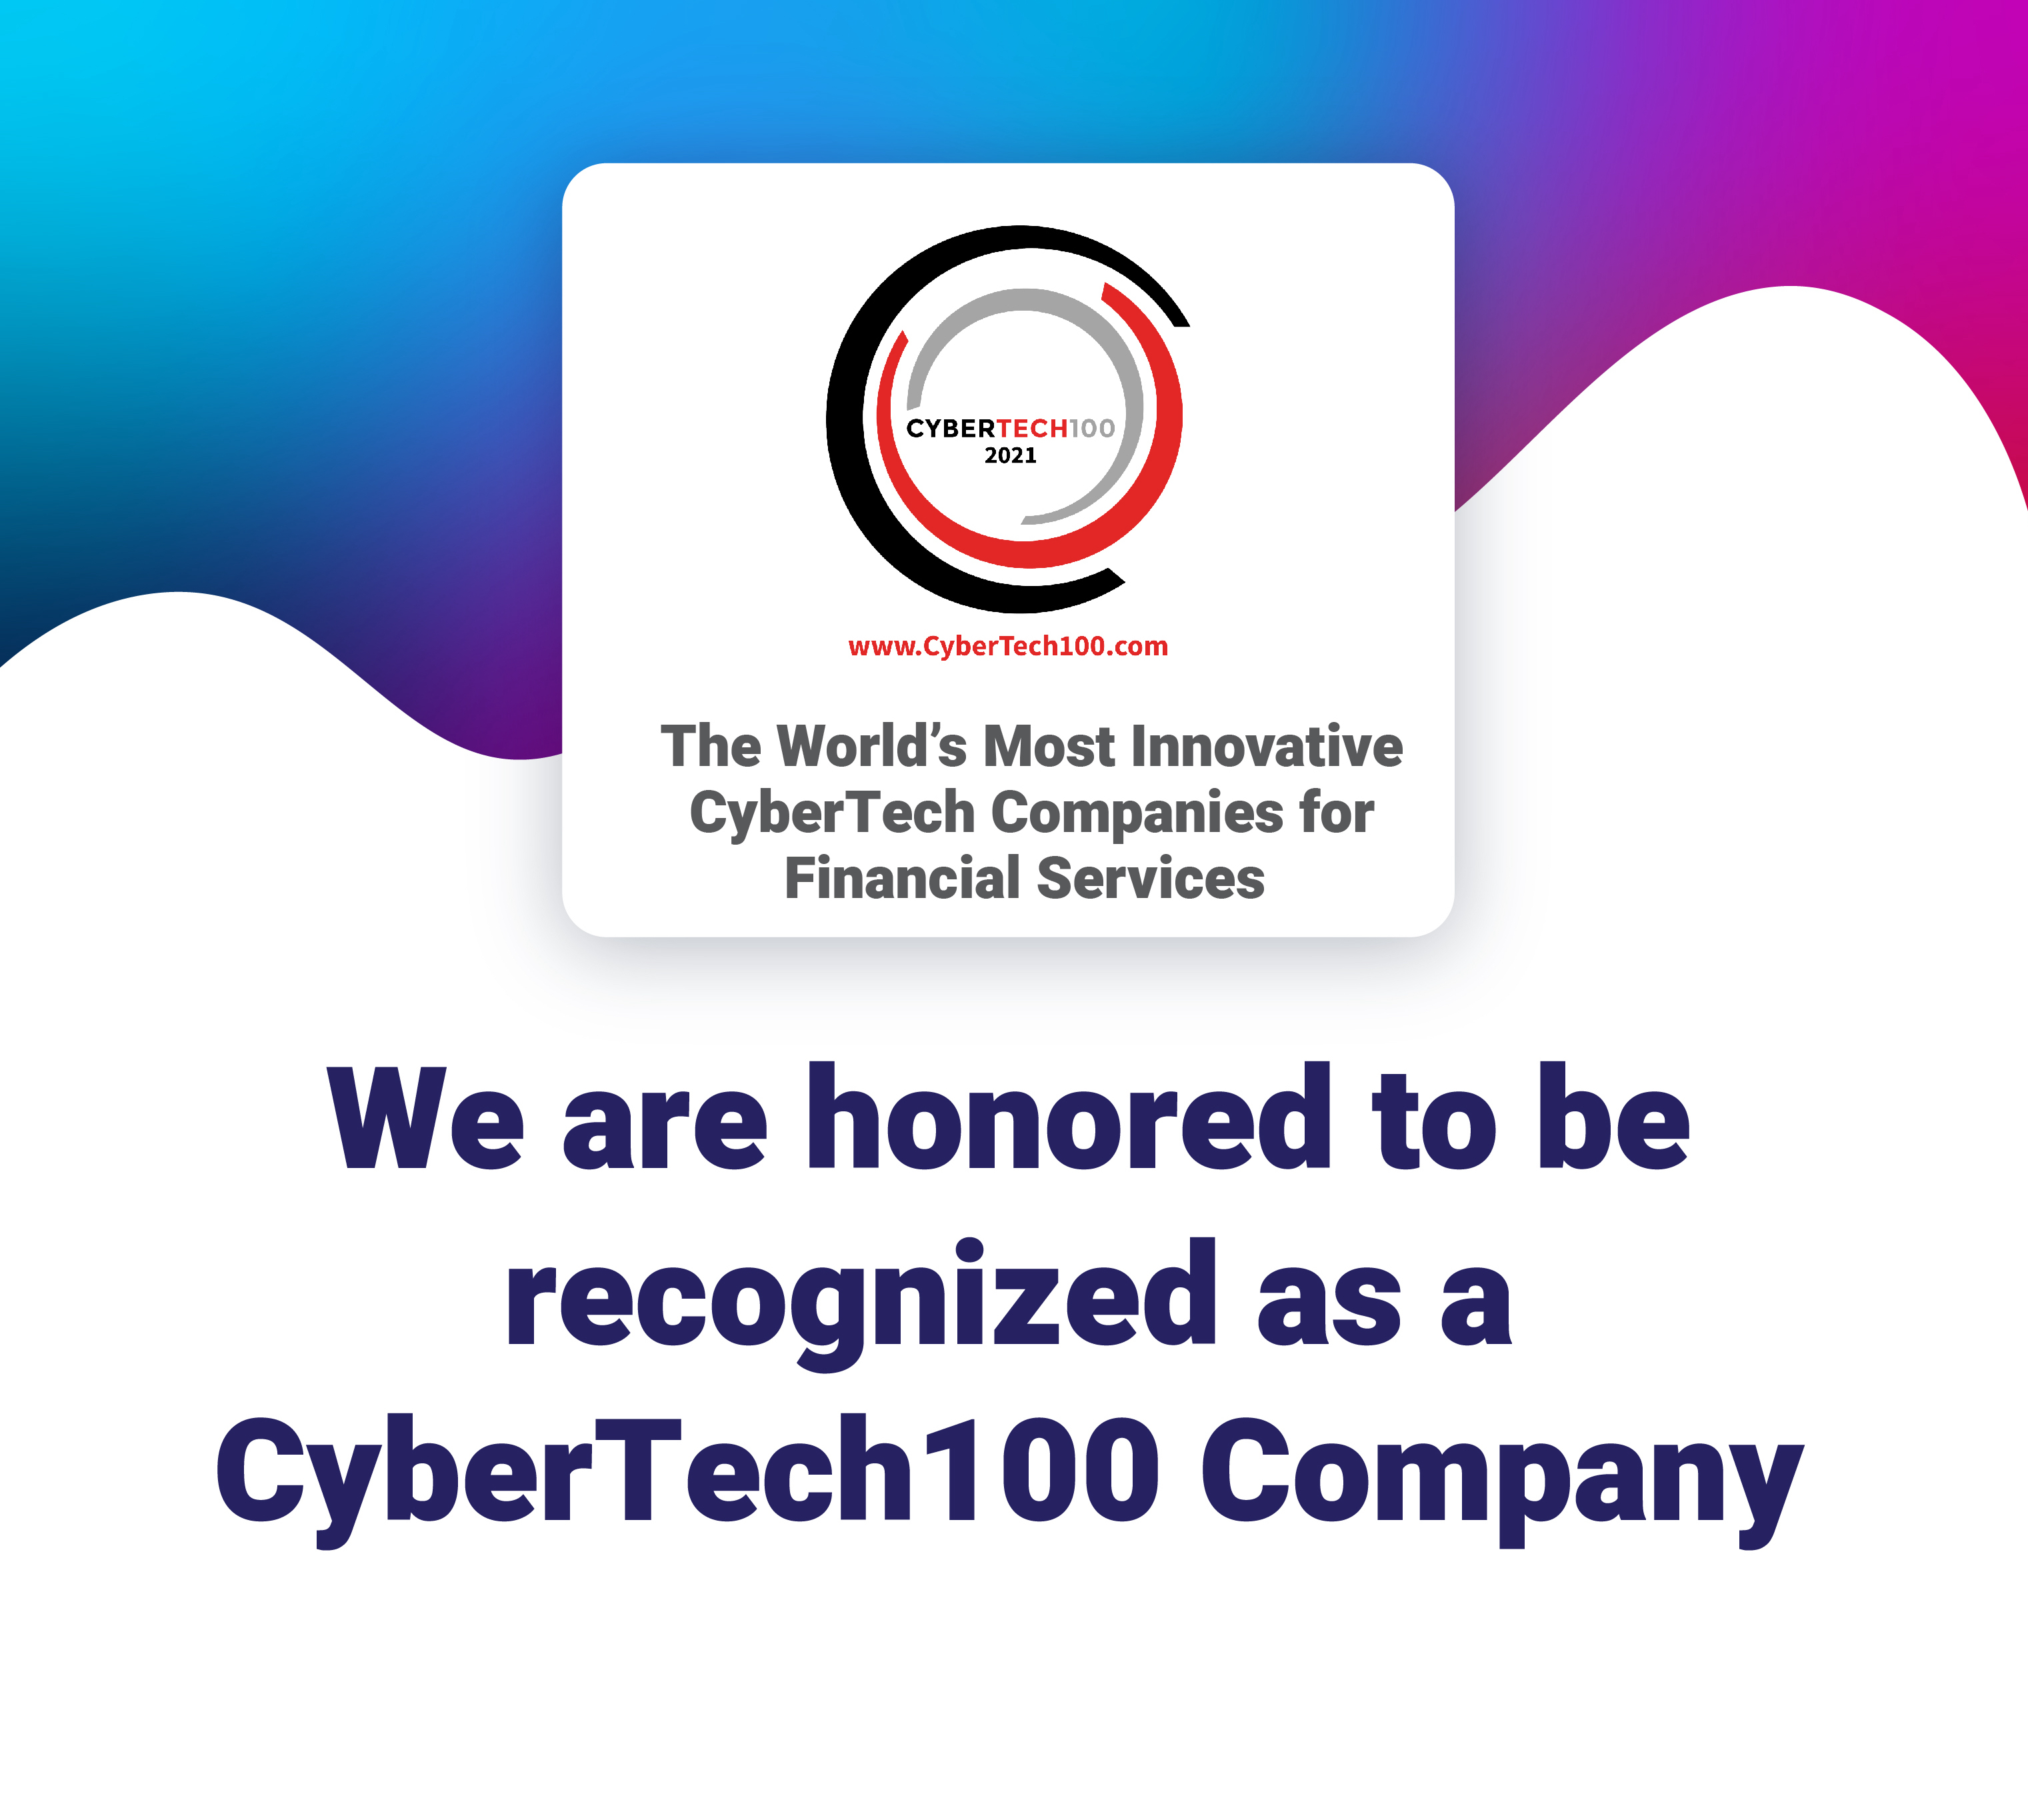 SCYTHE is proud to be recognized on the CyberTech100 for 2021